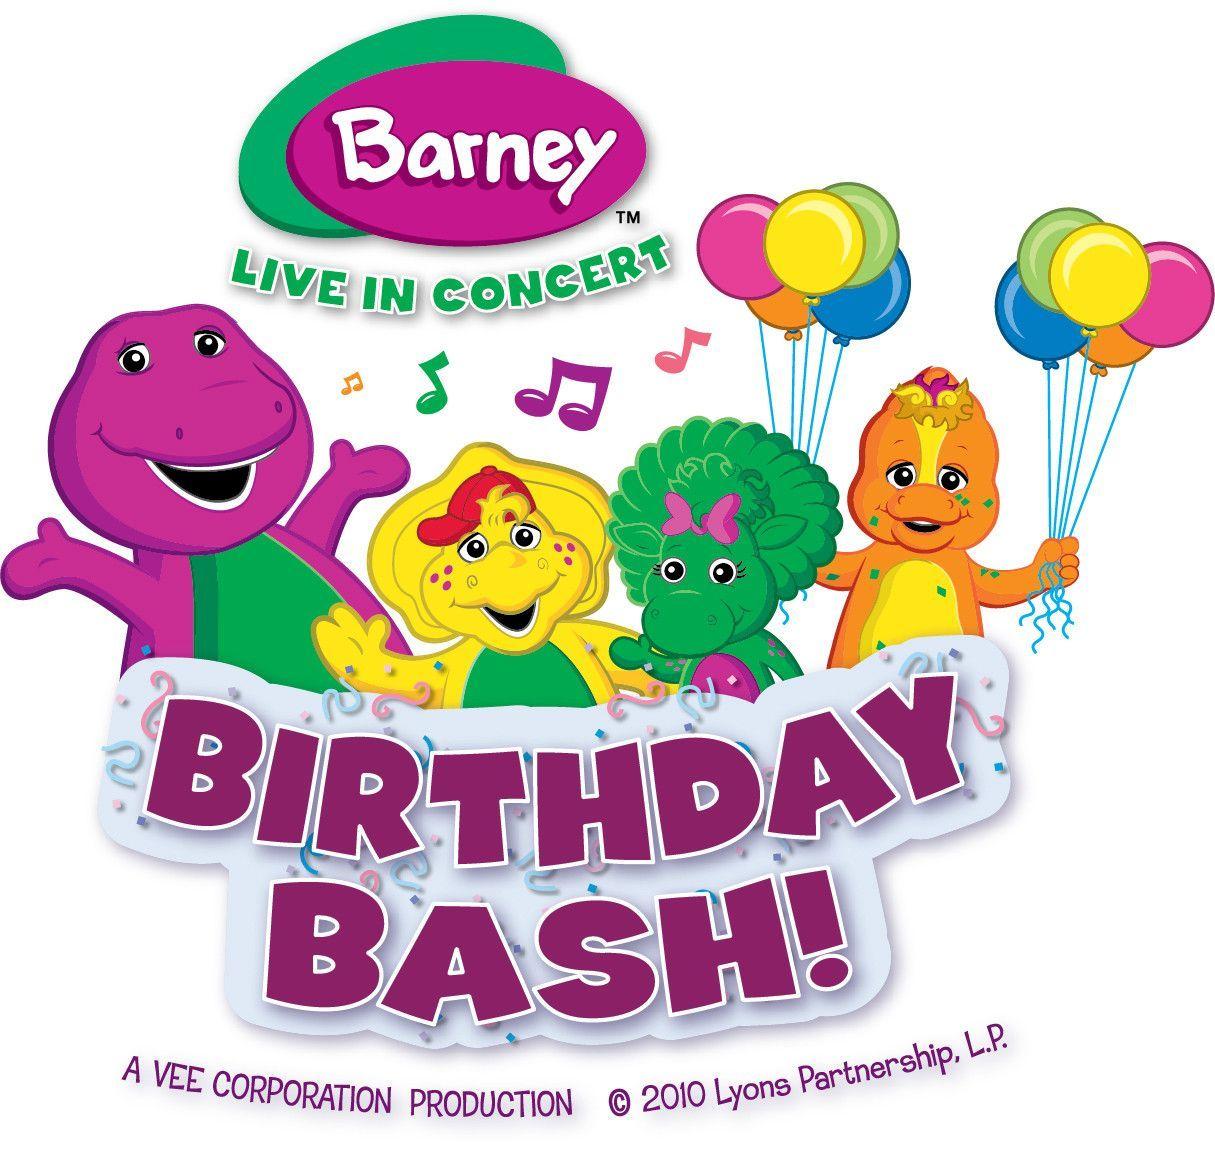 Barney and Friends Family Wallpaper Downloads for Mobile Phones